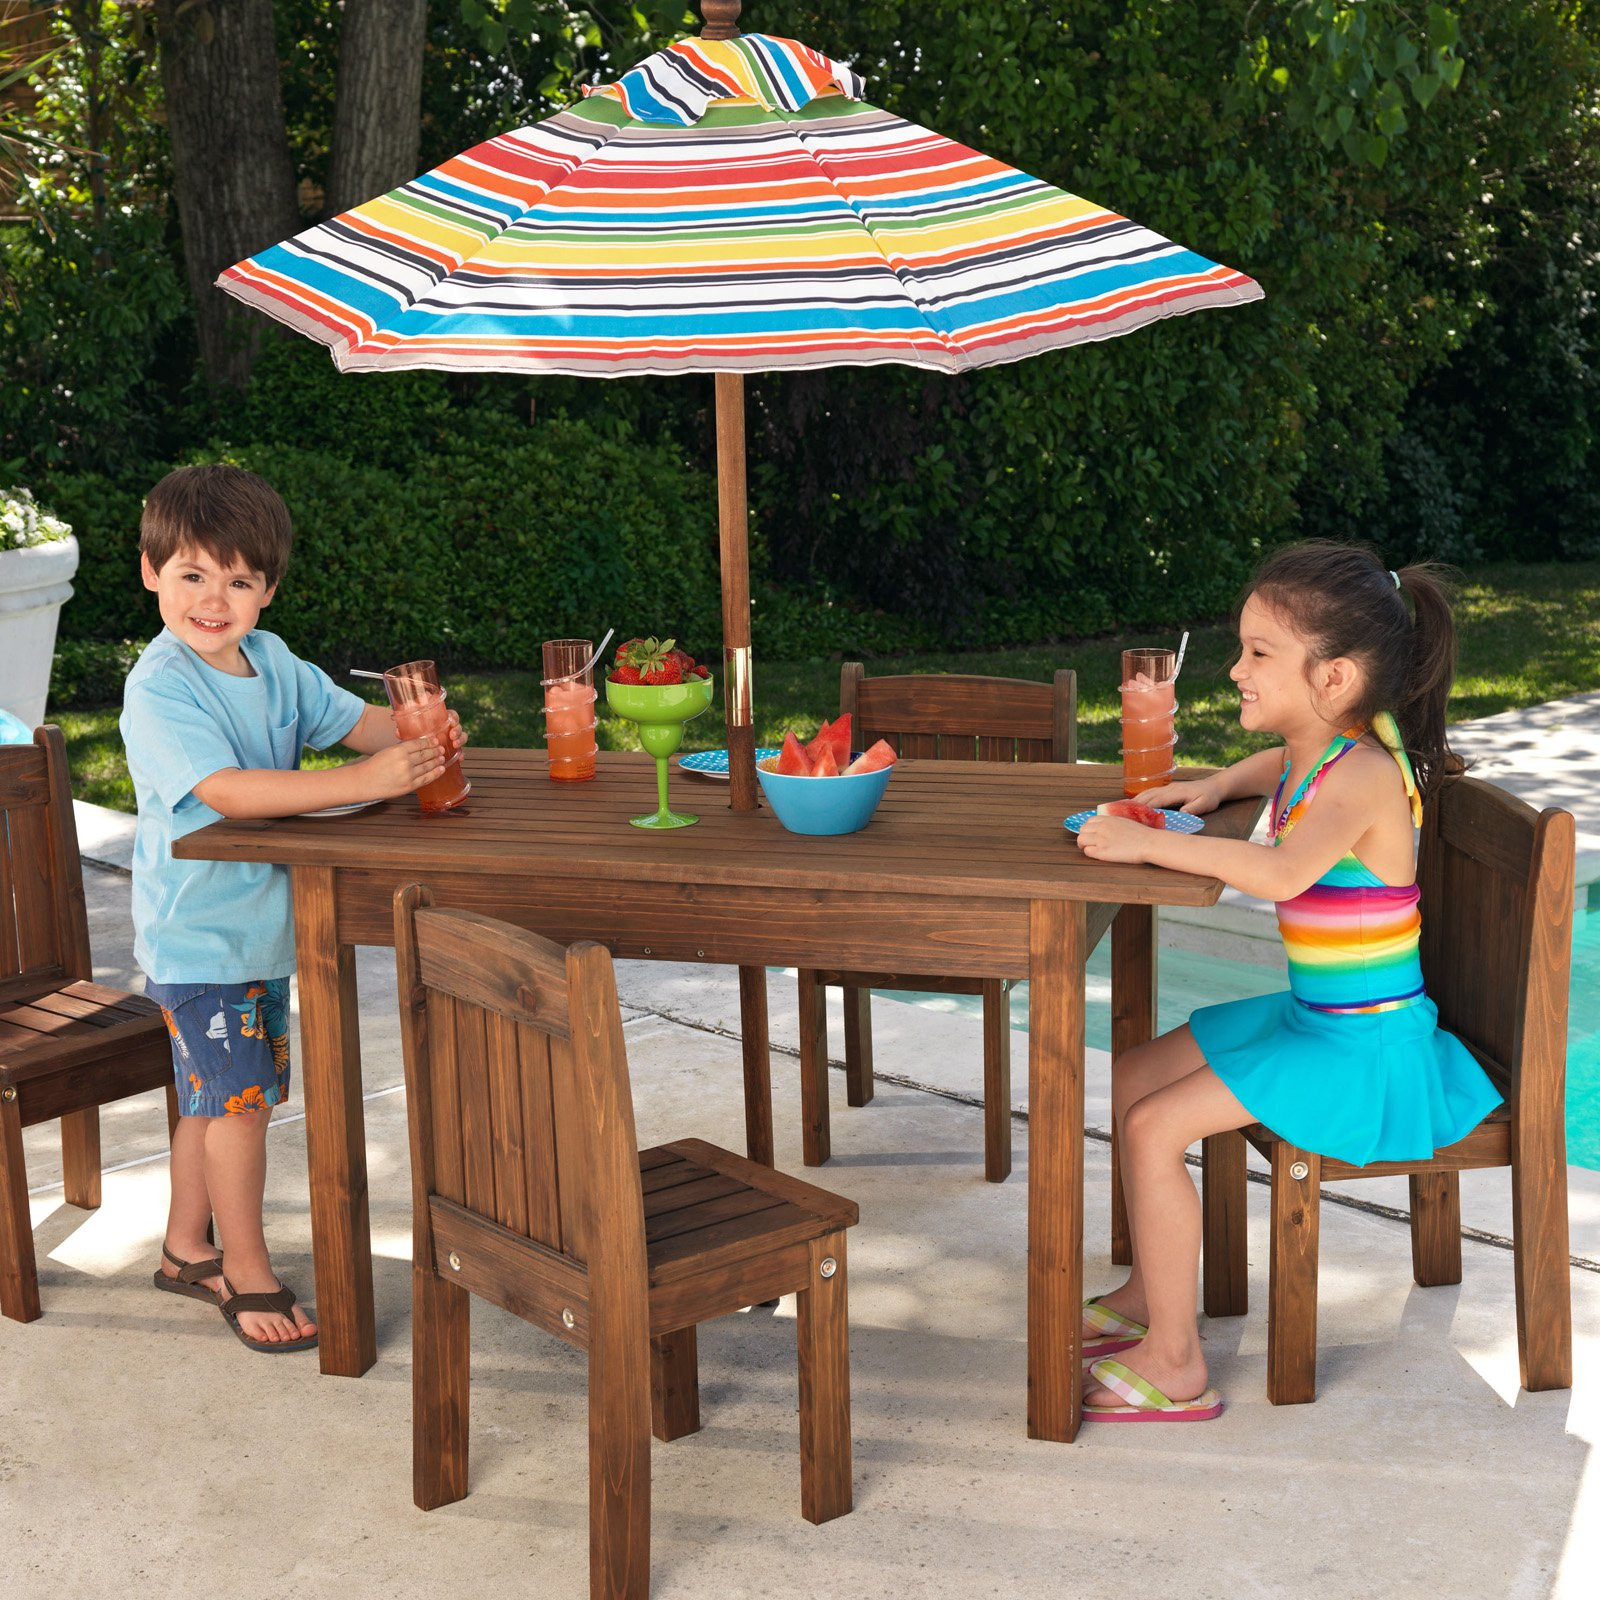 Kids Outdoor Table And Bench
 KidKraft Outdoor Table and 4 Stacking Chairs with Striped